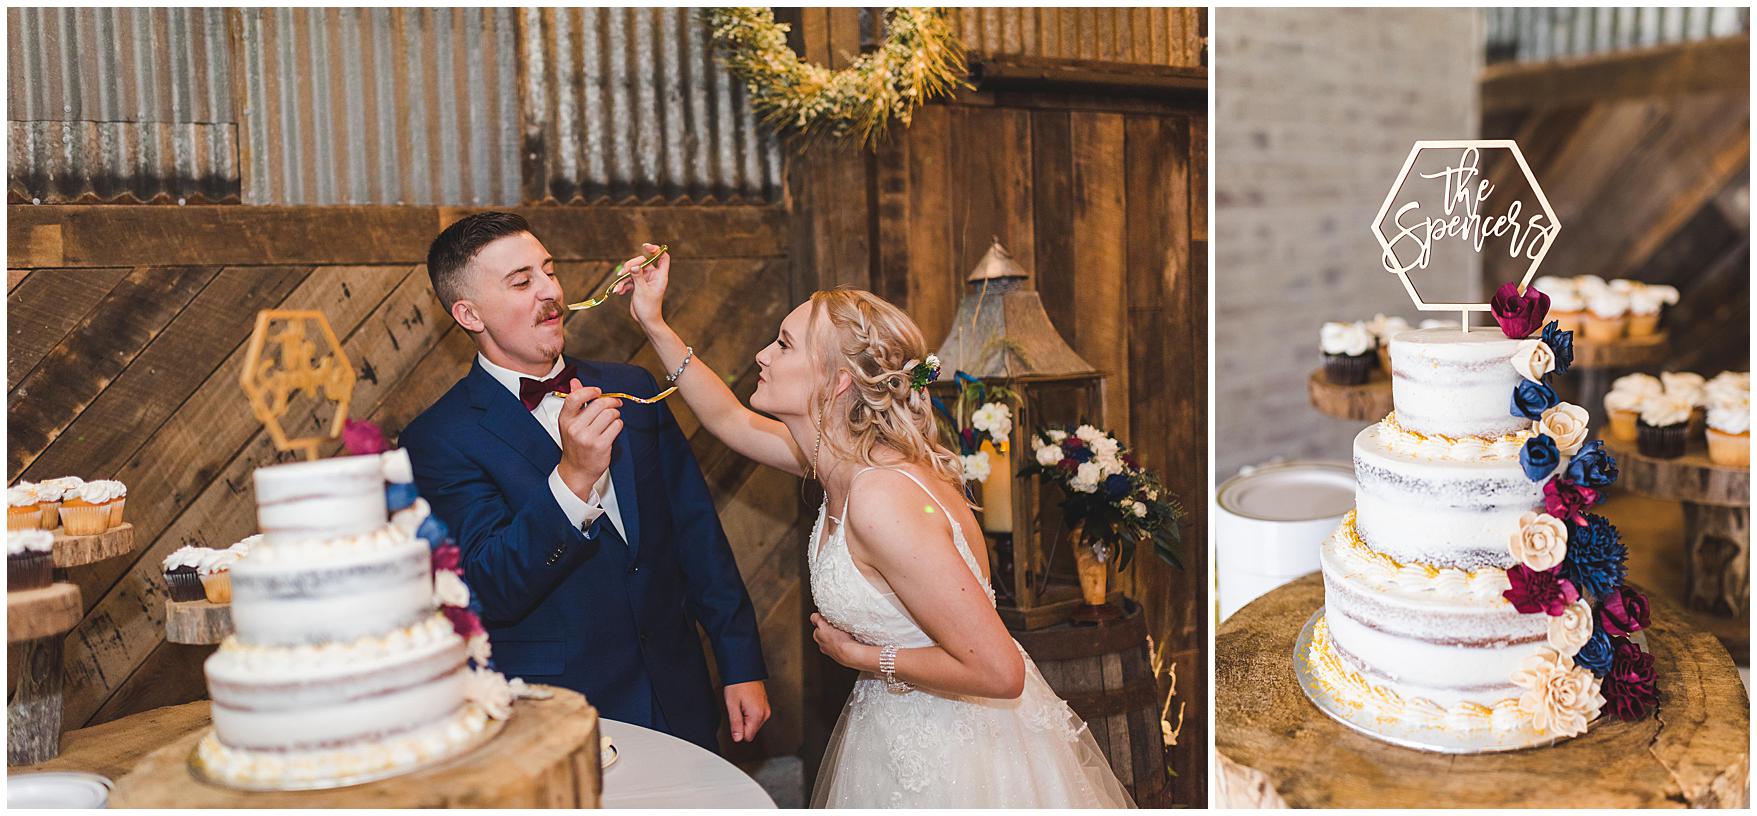 bride and groom cut the cake at their dream southern wedding